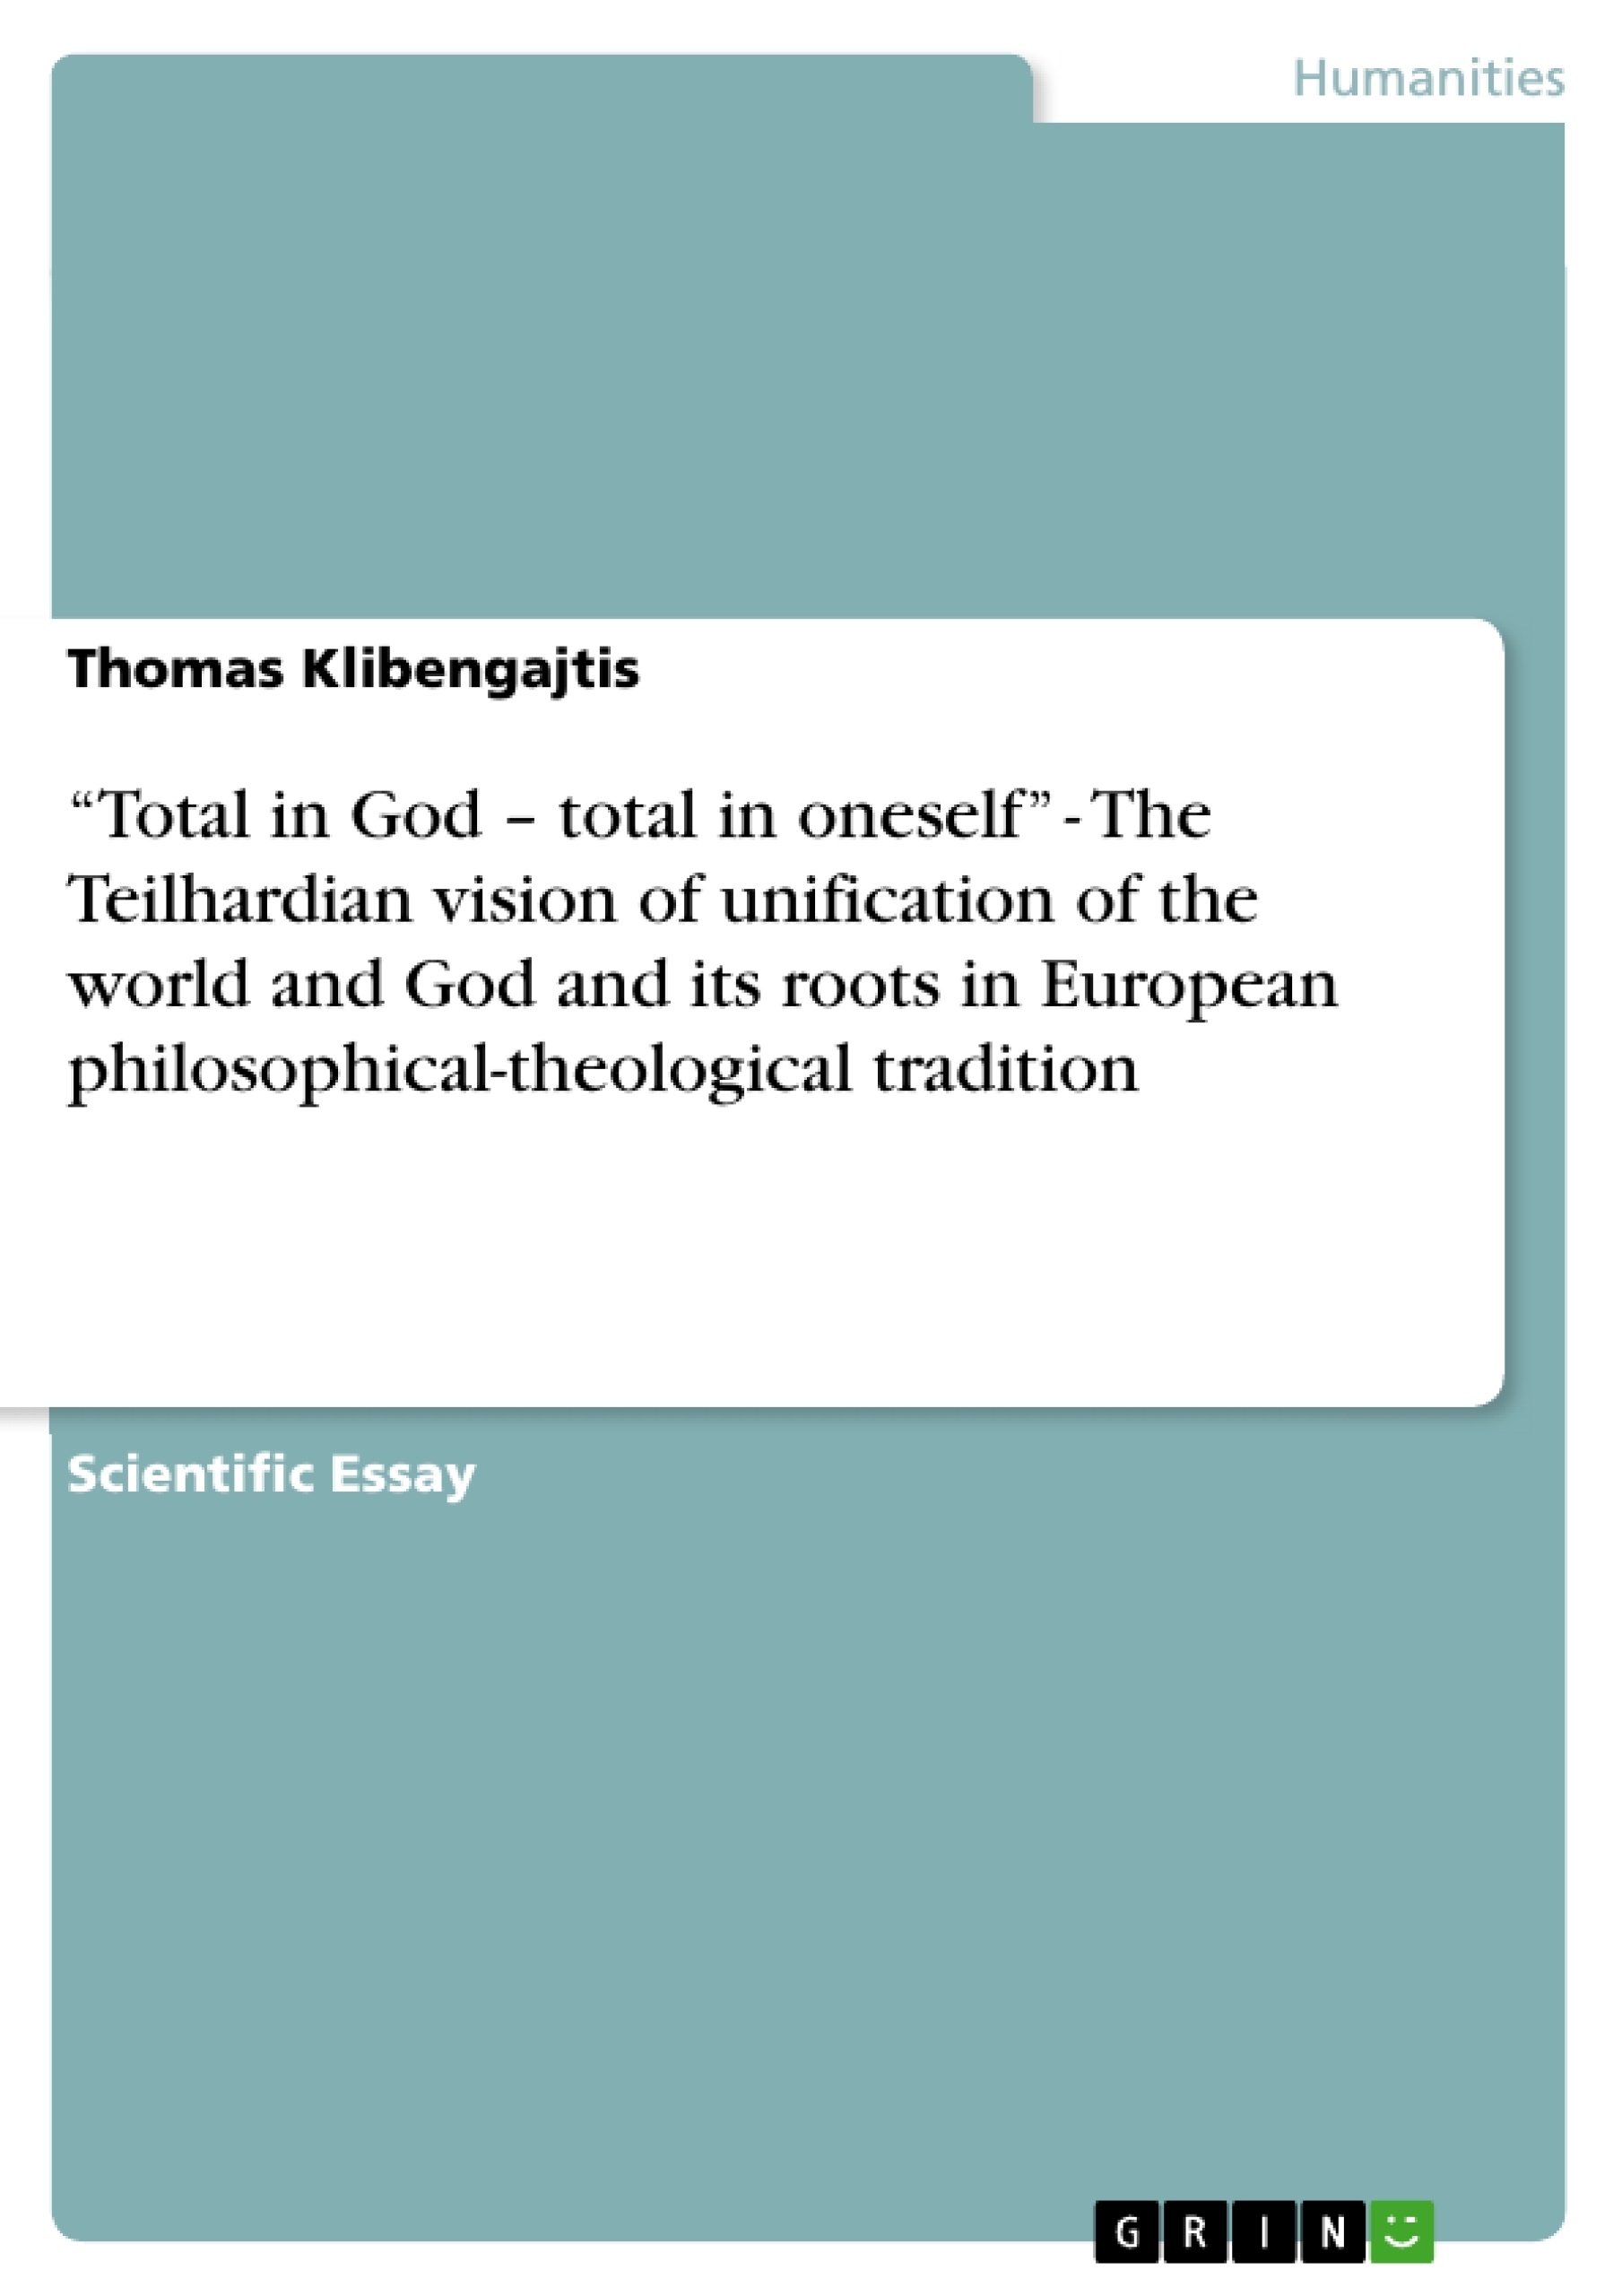 Titre: “Total in God – total in oneself” - The Teilhardian vision of unification of the world and God and its roots in European philosophical-theological tradition